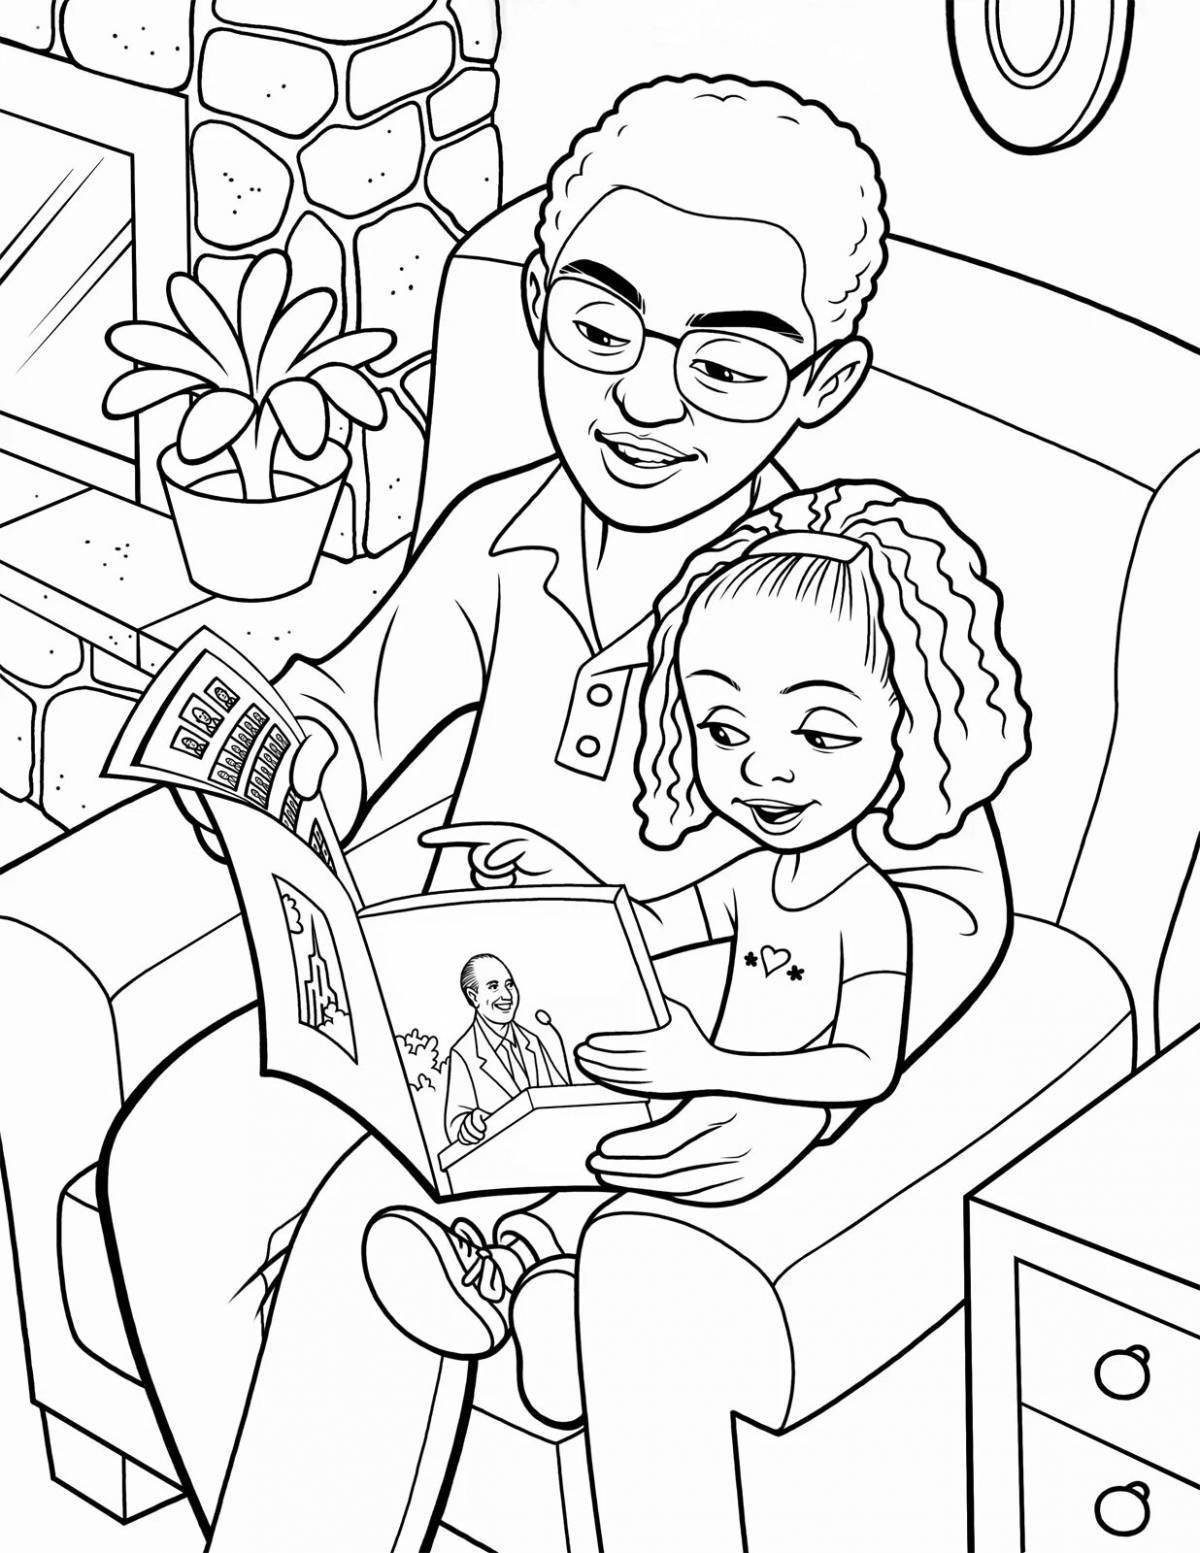 Admiring the coloring book baby and dad